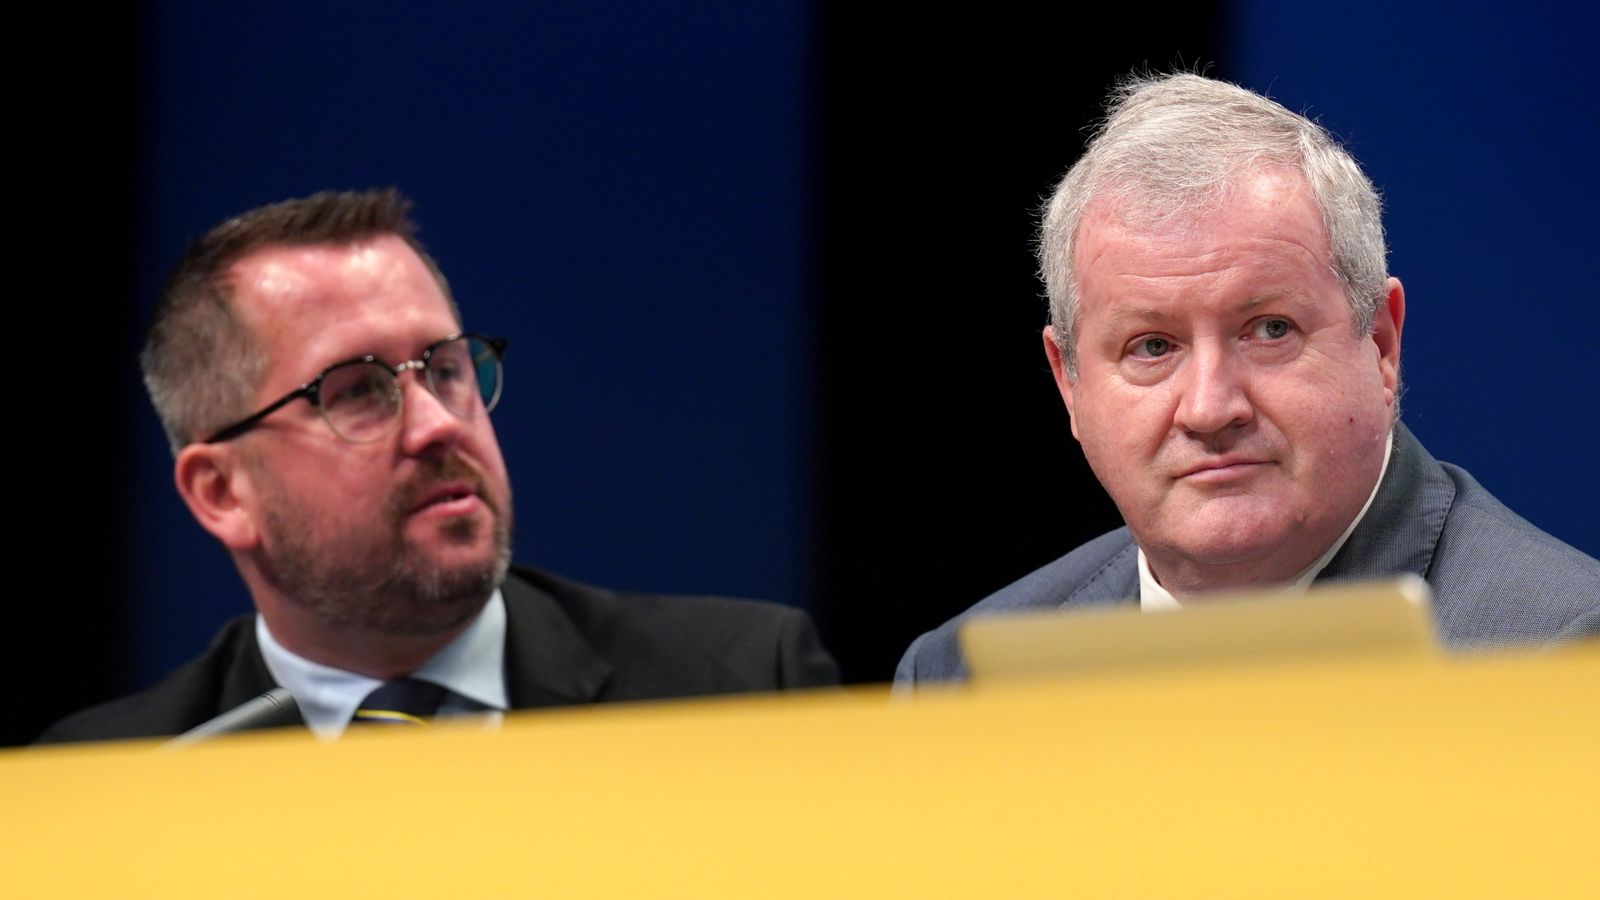 SNP MP Stewart McDonald 'removed' from committee after Westminster leadership changes